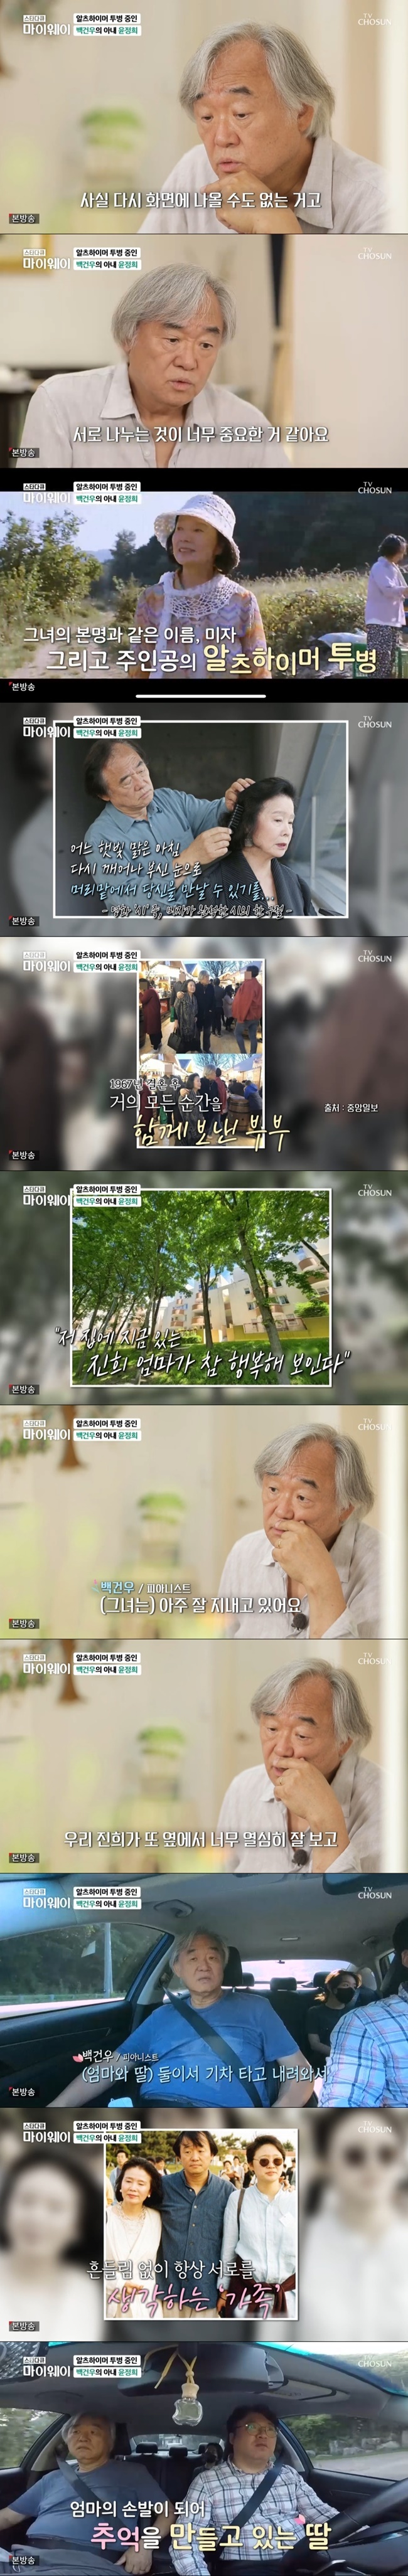 The Pianist baek geon-woo told his wife, Yoon Jin-hee, who has Alzheimers.The Pianist baek geon-woo appeared on the TV Chosun Star Documentary Myway (hereinafter referred to as My Way), which airs on September 5.Earlier, baek geon-woo revealed directly that his wife, Yoon Jeong-hee, is battling Alzheimers disease.Its not so good news that you have Alzheimers, he said.Now it was a stage that I could no longer hide and it seemed that those who loved Yoon Jin-hee should know.In fact, I thought it was time to announce it because I could not come back to the screen. The figure of Yoon Jeong-hee stops in the Lee Chang-dong director film Poetry (2010).The role of Yoon Jin-hee in the play was the same as his real name and had Alzheimers.Poetry is the only 16-year screen return by Yoon Jeong-hee, through which Yoon Jeong-hee won best actress at seven domestic and international film festivals.I think it was good to be able to finish my last work with a good work, said Baek geon-woo. I was more saddened to be able to continue to do it because I loved the movie more day by day.He also mentioned the recent situation of Yoon Jin-hee. Chen Xis mother seems to be the ideal of life now, he said.It is very peaceful and beautiful, and now at least four or five people are helping, and I hope that I will keep that calm life now.Im doing well, Im peacefully around, Im so good at nature, and our Chen Xi sees it too hard next door.Ive been to Vacation now and thats what Im staying for. Im with my daughter and helpers, he added.Currently, Yoon Jeong-hee is on vacation with her daughter, baek geon-woo said, I put people on because I thought the train would be comfortable.They come down by train and care a lot. (Help) Im helping in Paris, and I know him. Chen Xi is good at that.Thats how I came to Seoul for two years every year in Vacation. Miami, New York, Canada, USA, he said.On the other hand, in February, the Blue House National Peoples Office One bulletin board posted the title Please save the movie actor XXX who is falling down Haru Haru while being disconnected from the outside.The actor living in France was suffering from Alzheimers and diabetes, but his husband and daughter were left alone in France, and he was living alone in prison.Since then, it has been revealed that the main character of the article is Yoon Jin-hee, and the baek geon-woo side refuted it as baseless claim.I am sorry to have made a fuss about my family, said a baek geon-woo, who returned to Korea.As announced in Vinchero, Mr. Yoon Jin-hee is living a very calm life, Haru Haru, we have no problem. 